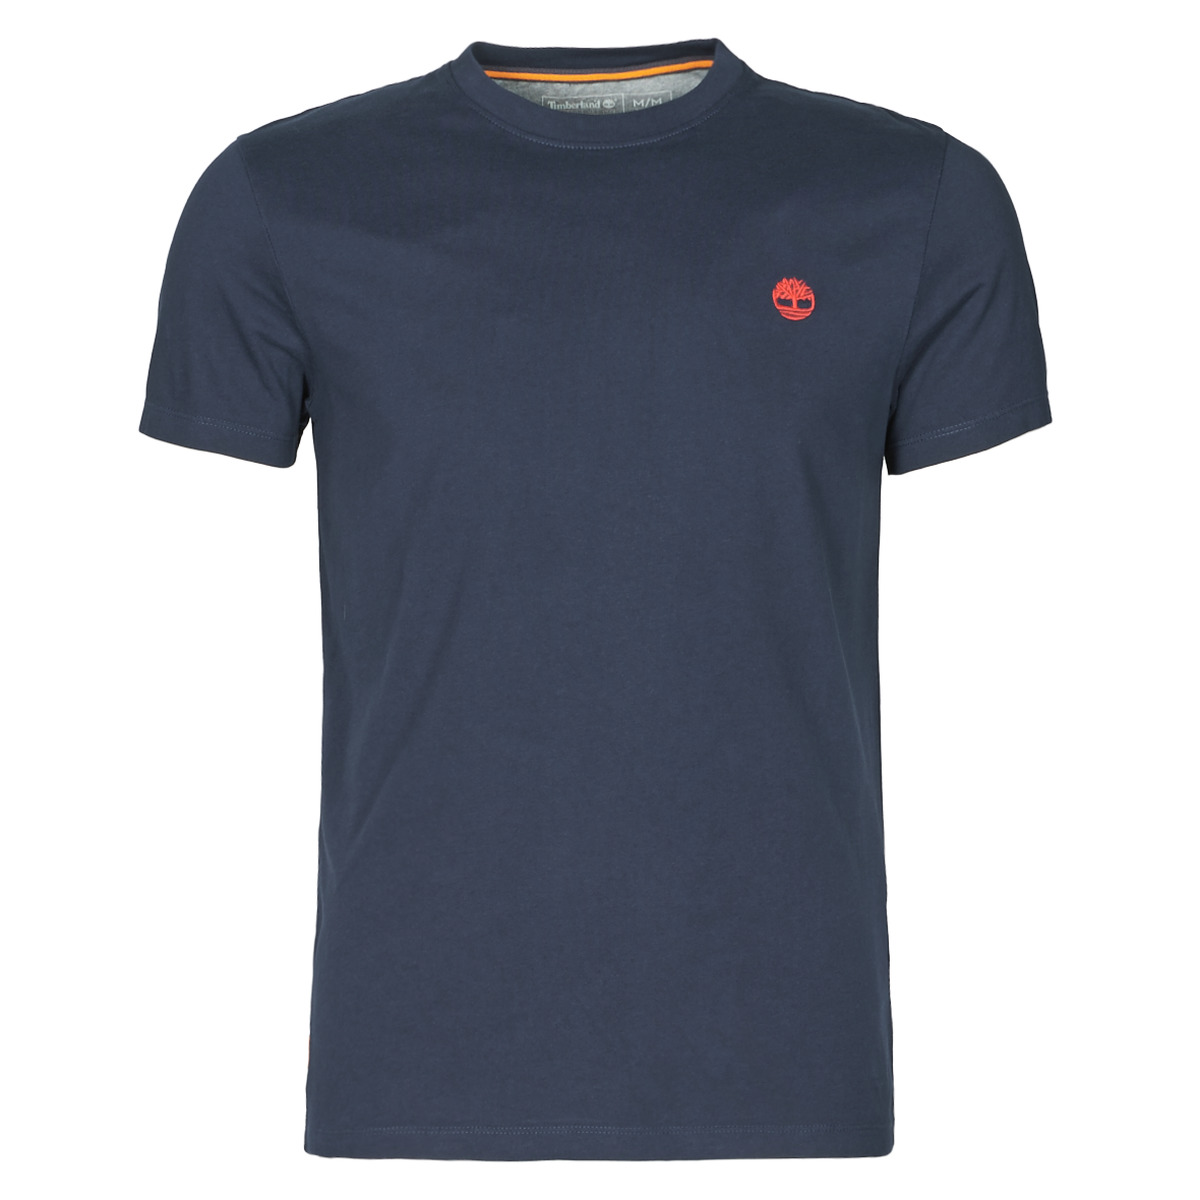 Timberland SS DUNSTAN RIVER POCKET | delivery Spartoo TEE Men - Marine Europe short-sleeved t-shirts € 33,00 SLIM Fast ! Clothing 